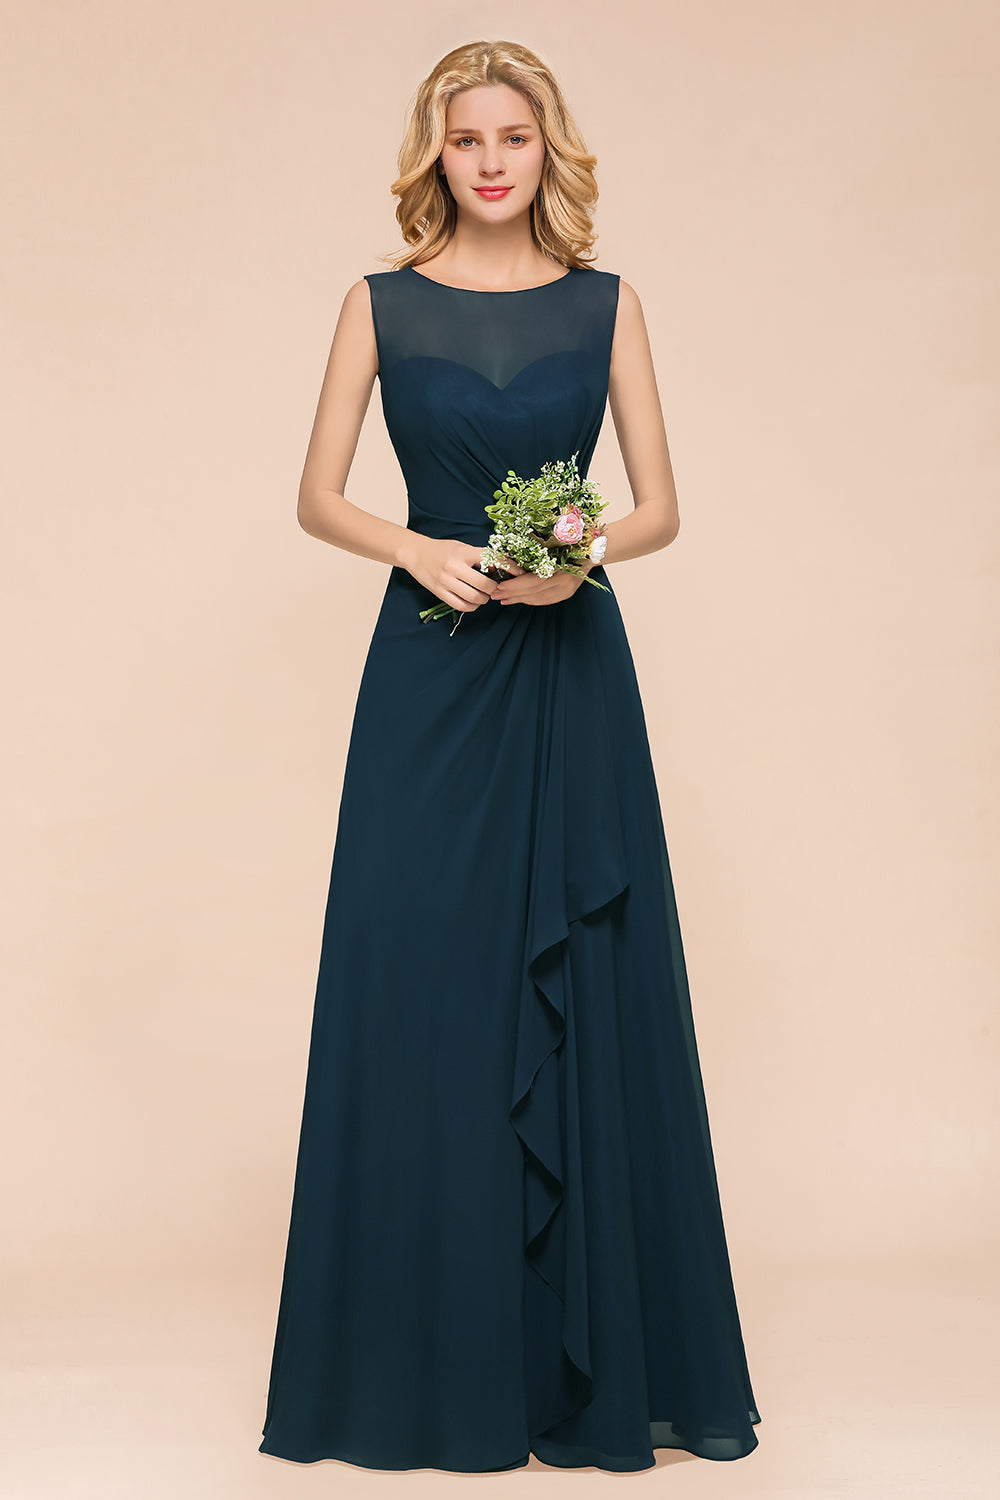 Chic Long A-line Bateau Chiffon Bridesmaid Dresses With Ruched-BIZTUNNEL